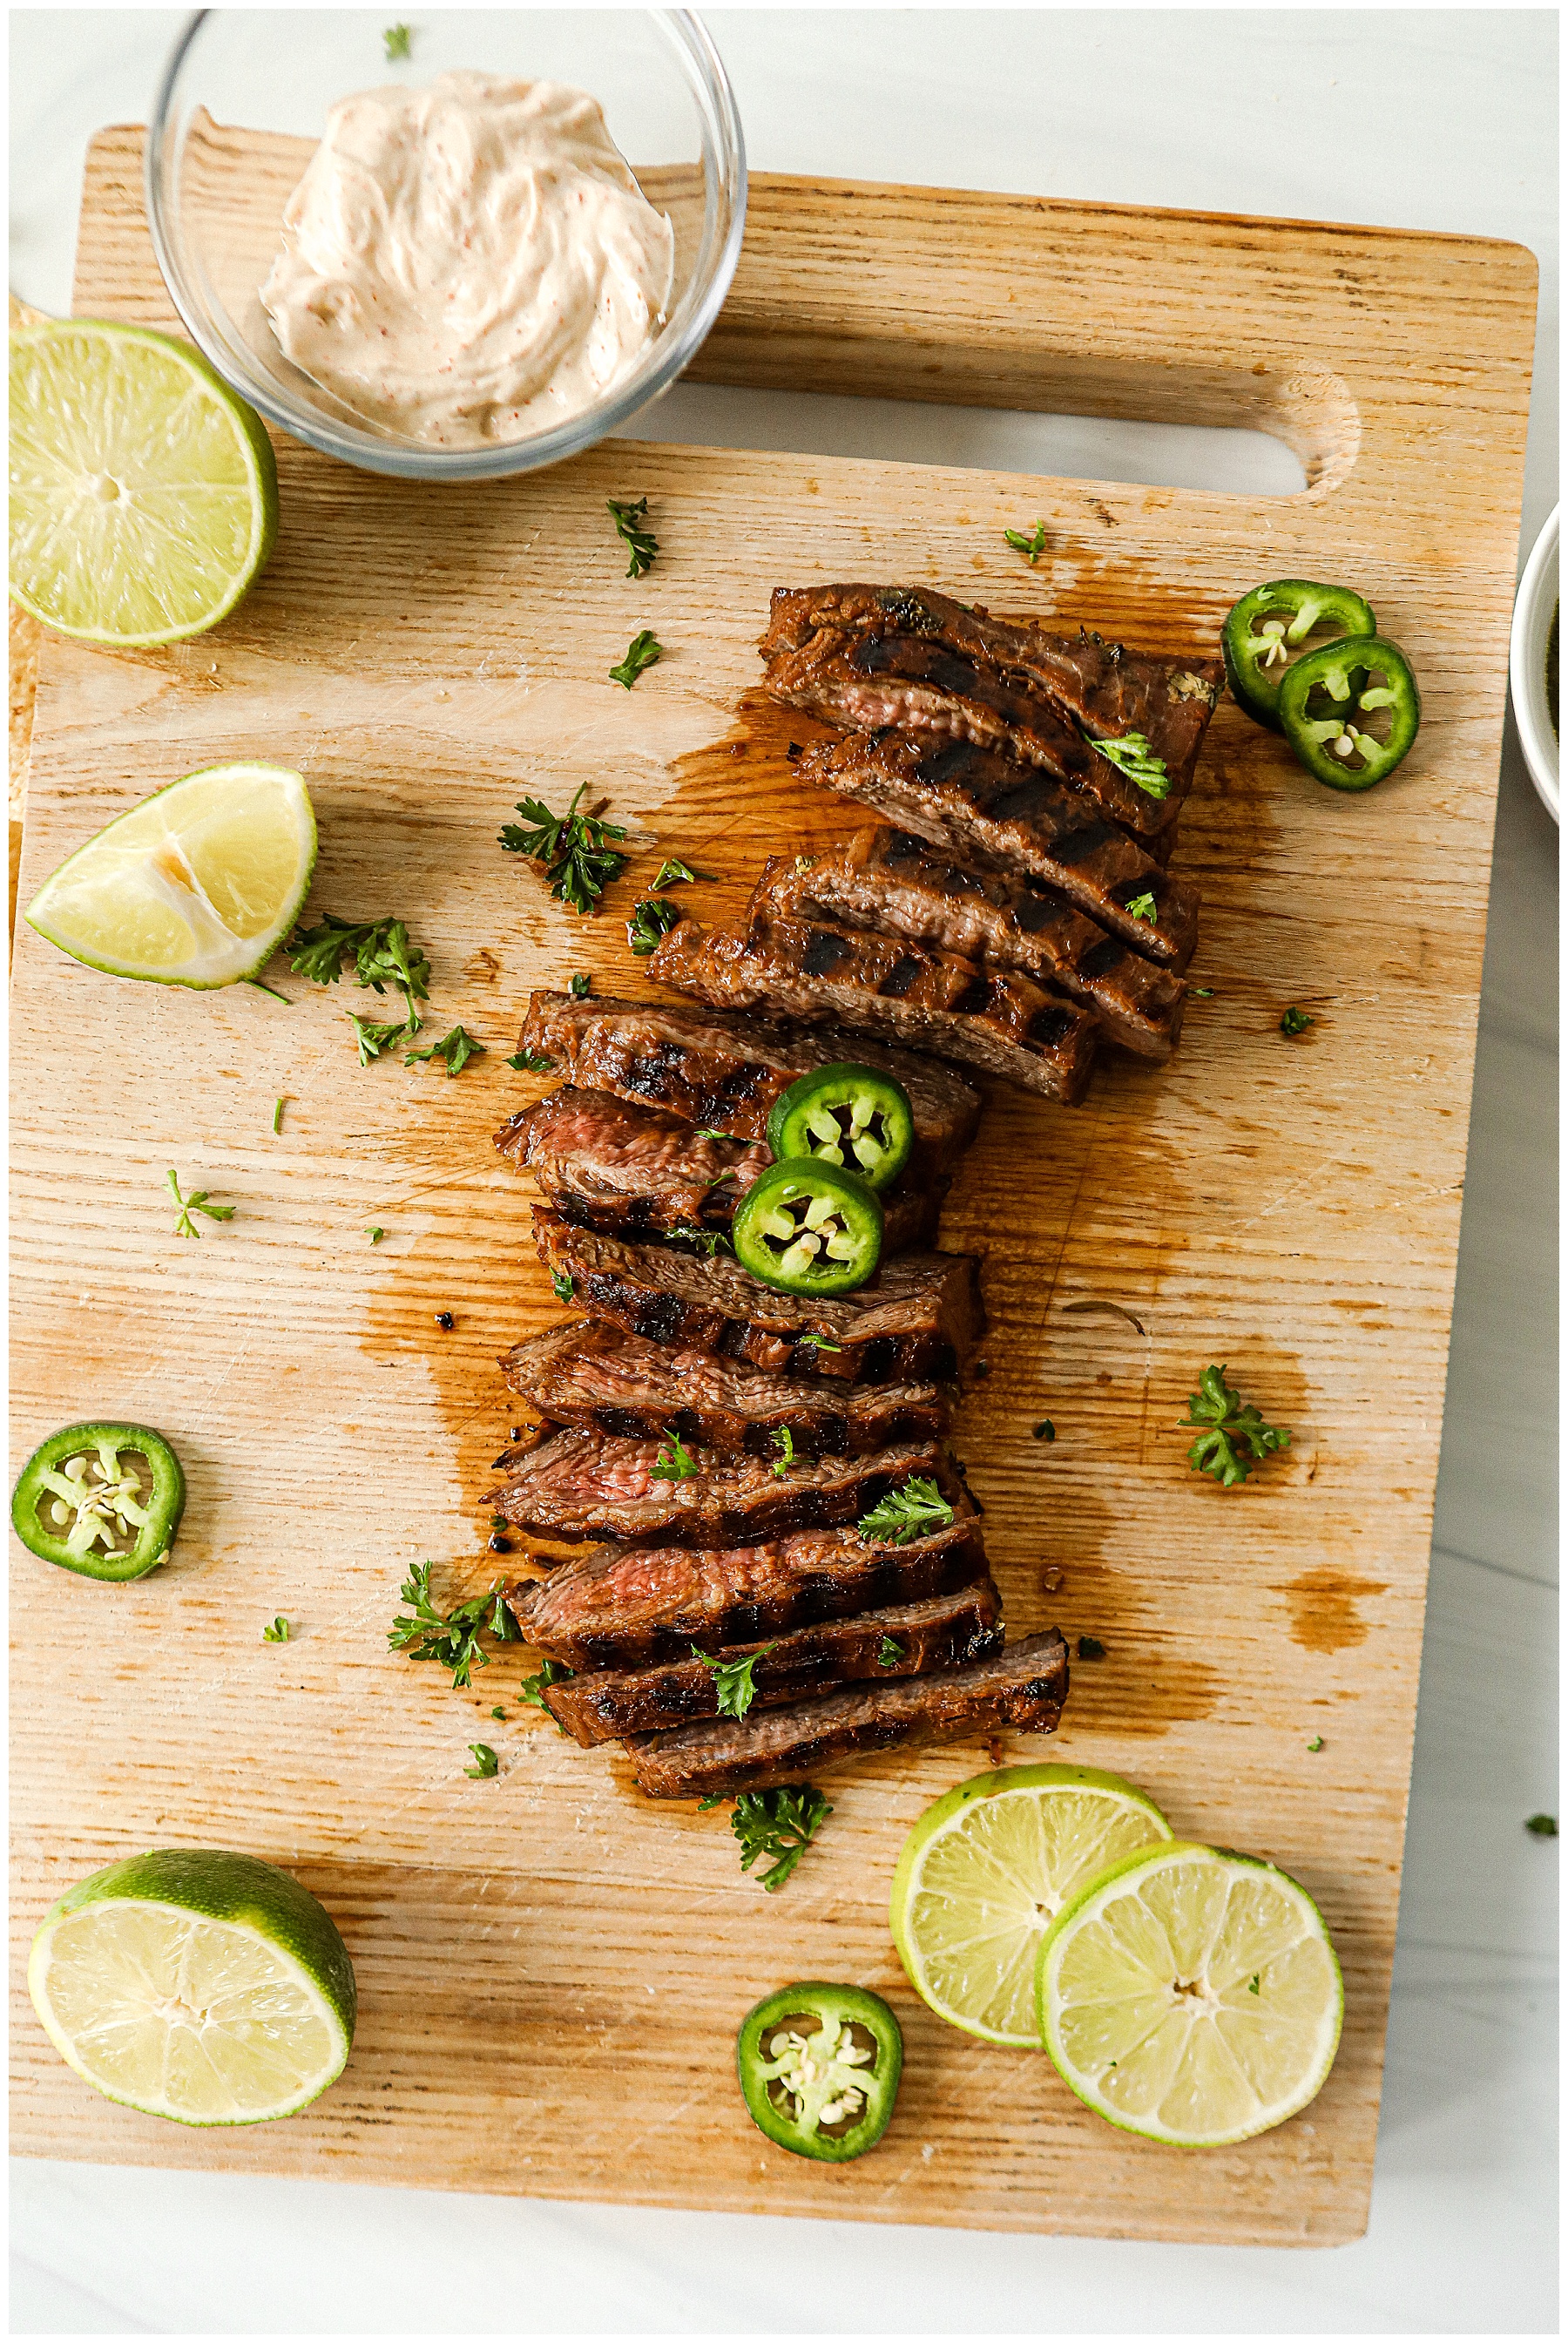 Tequila Lime Flank Steak on the grill